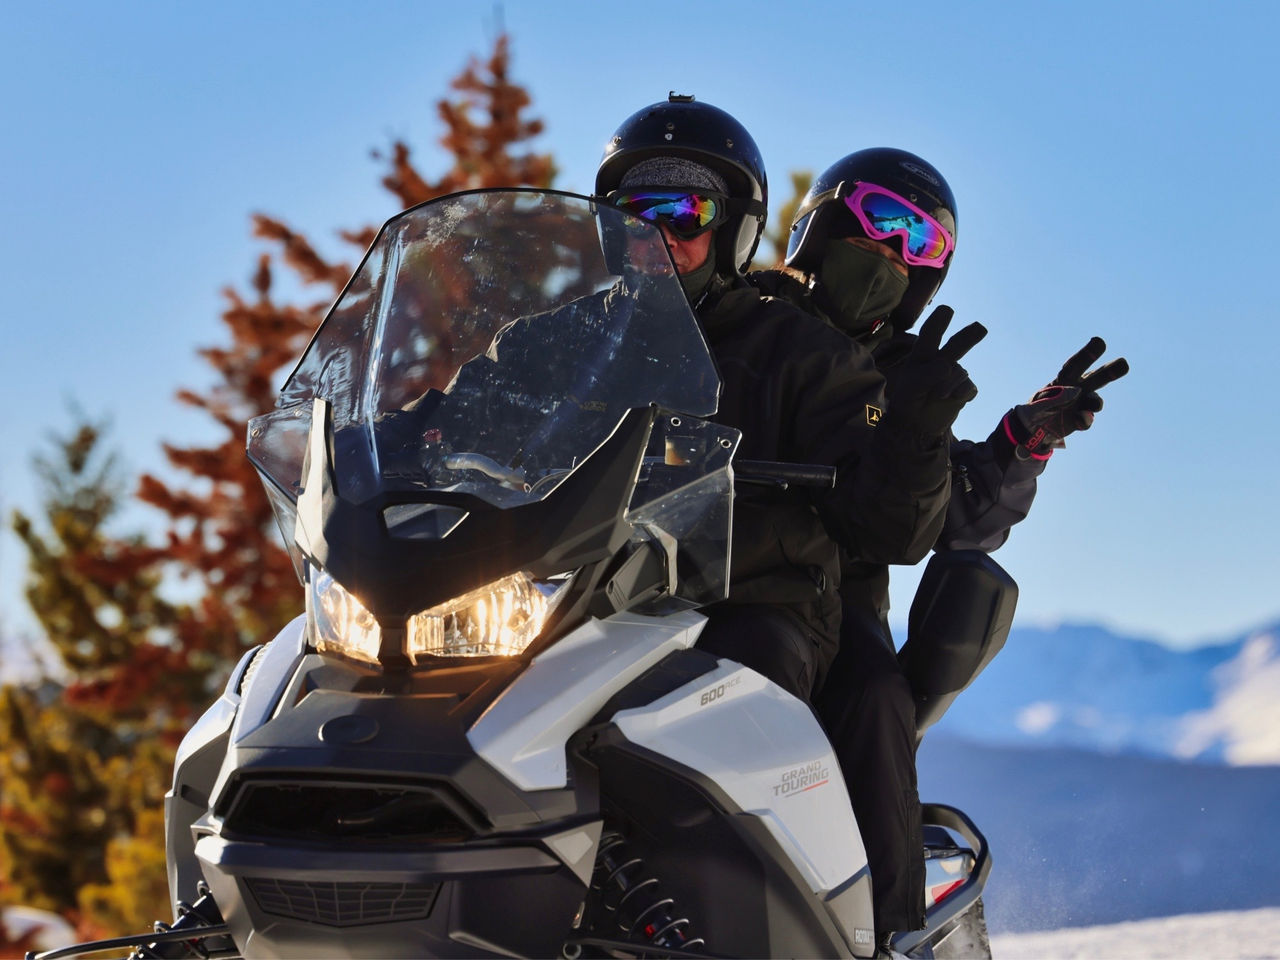 Join us for introductory Ski-Doo riding in Panorama, BC